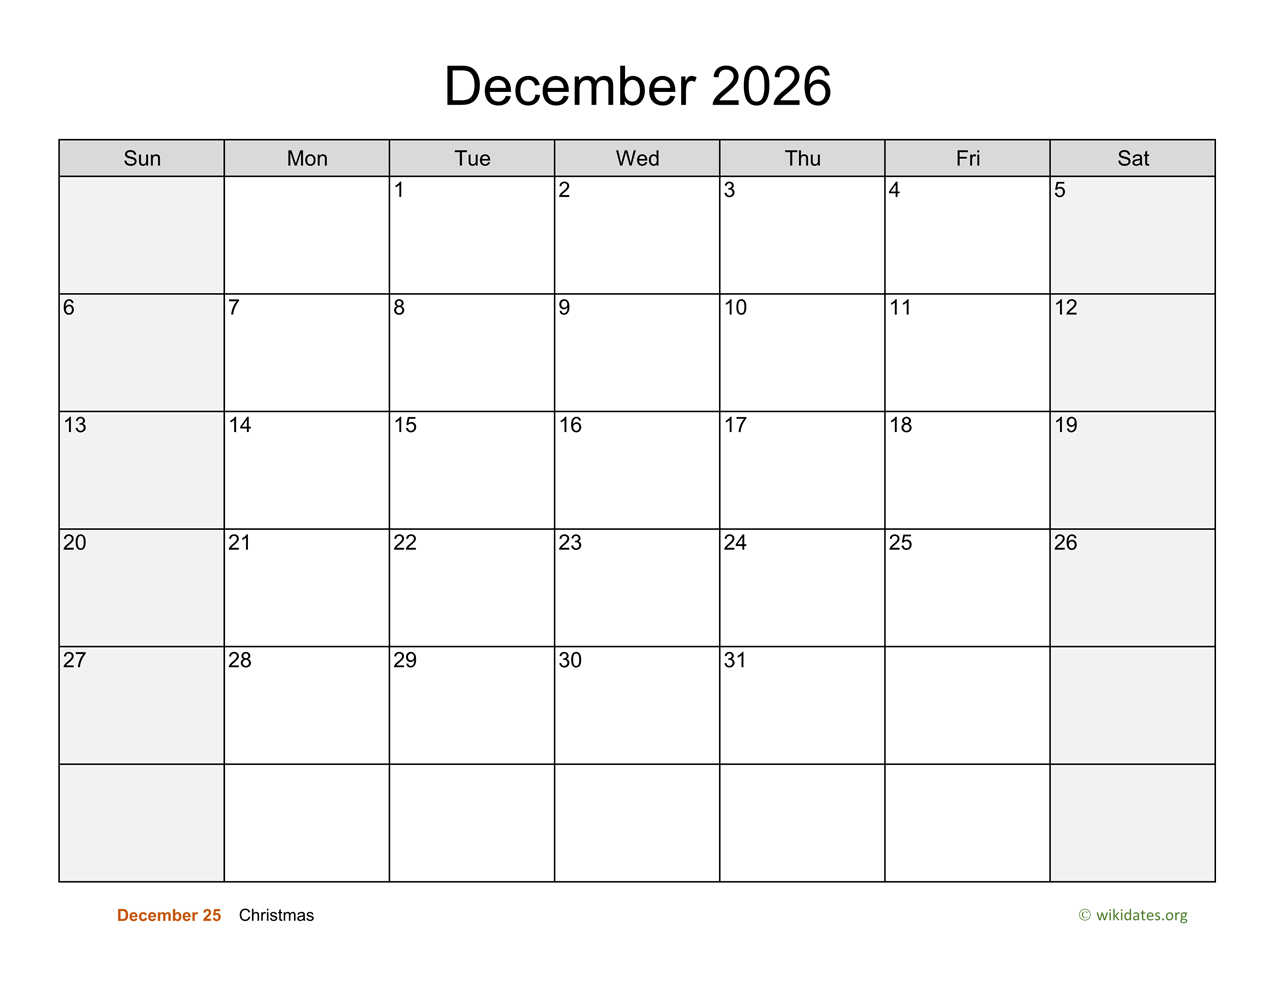 december-2026-calendar-with-weekend-shaded-wikidates